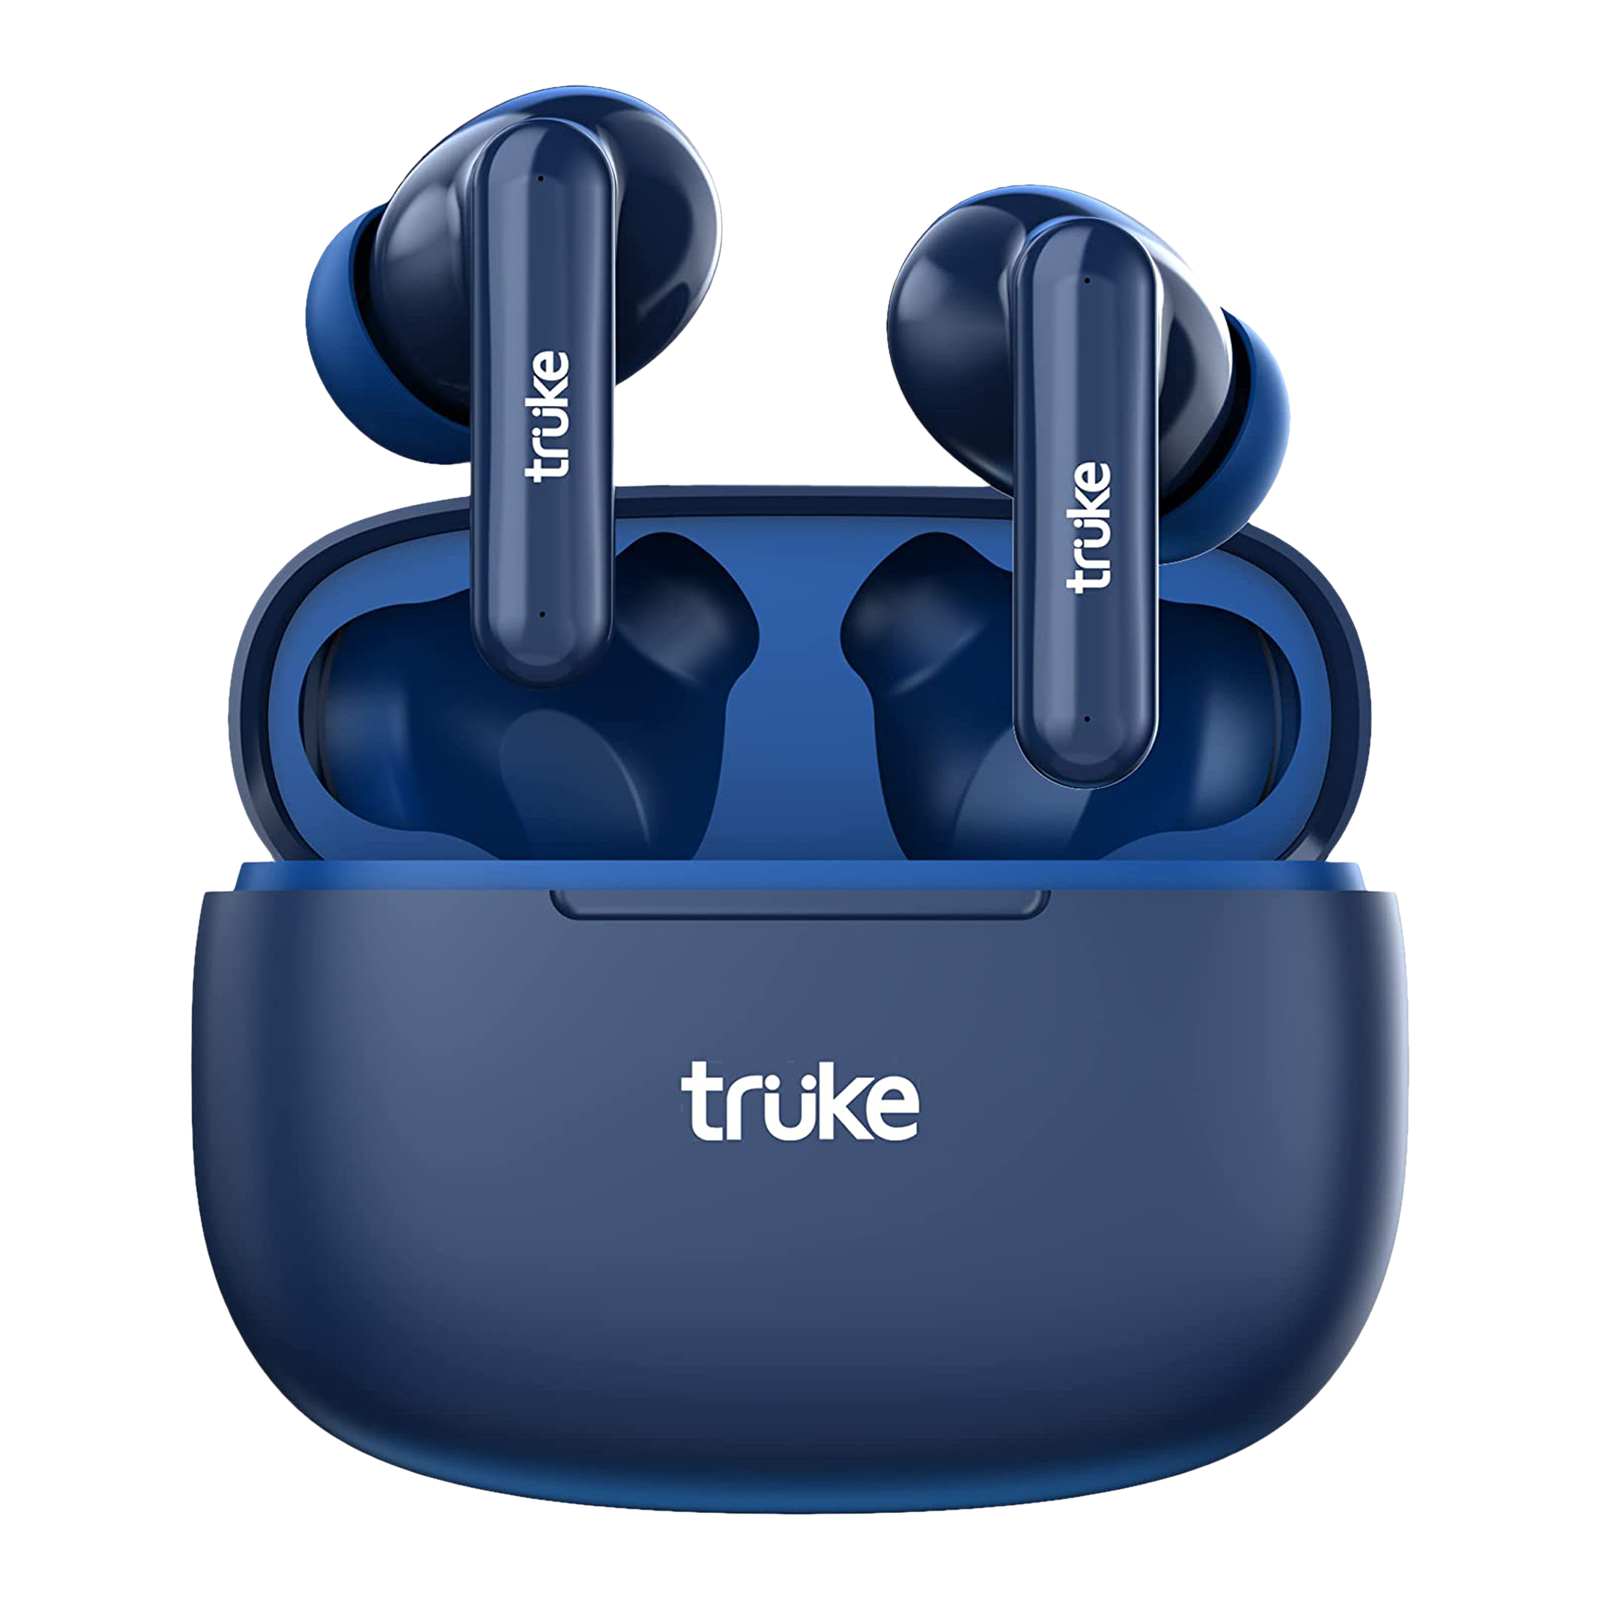 truke Airbuds Lite E1 TWS Earbuds with AI Noise Cancellation (IPX4 Sweat & Water Resistant, 48 Hours Playback, Blue)